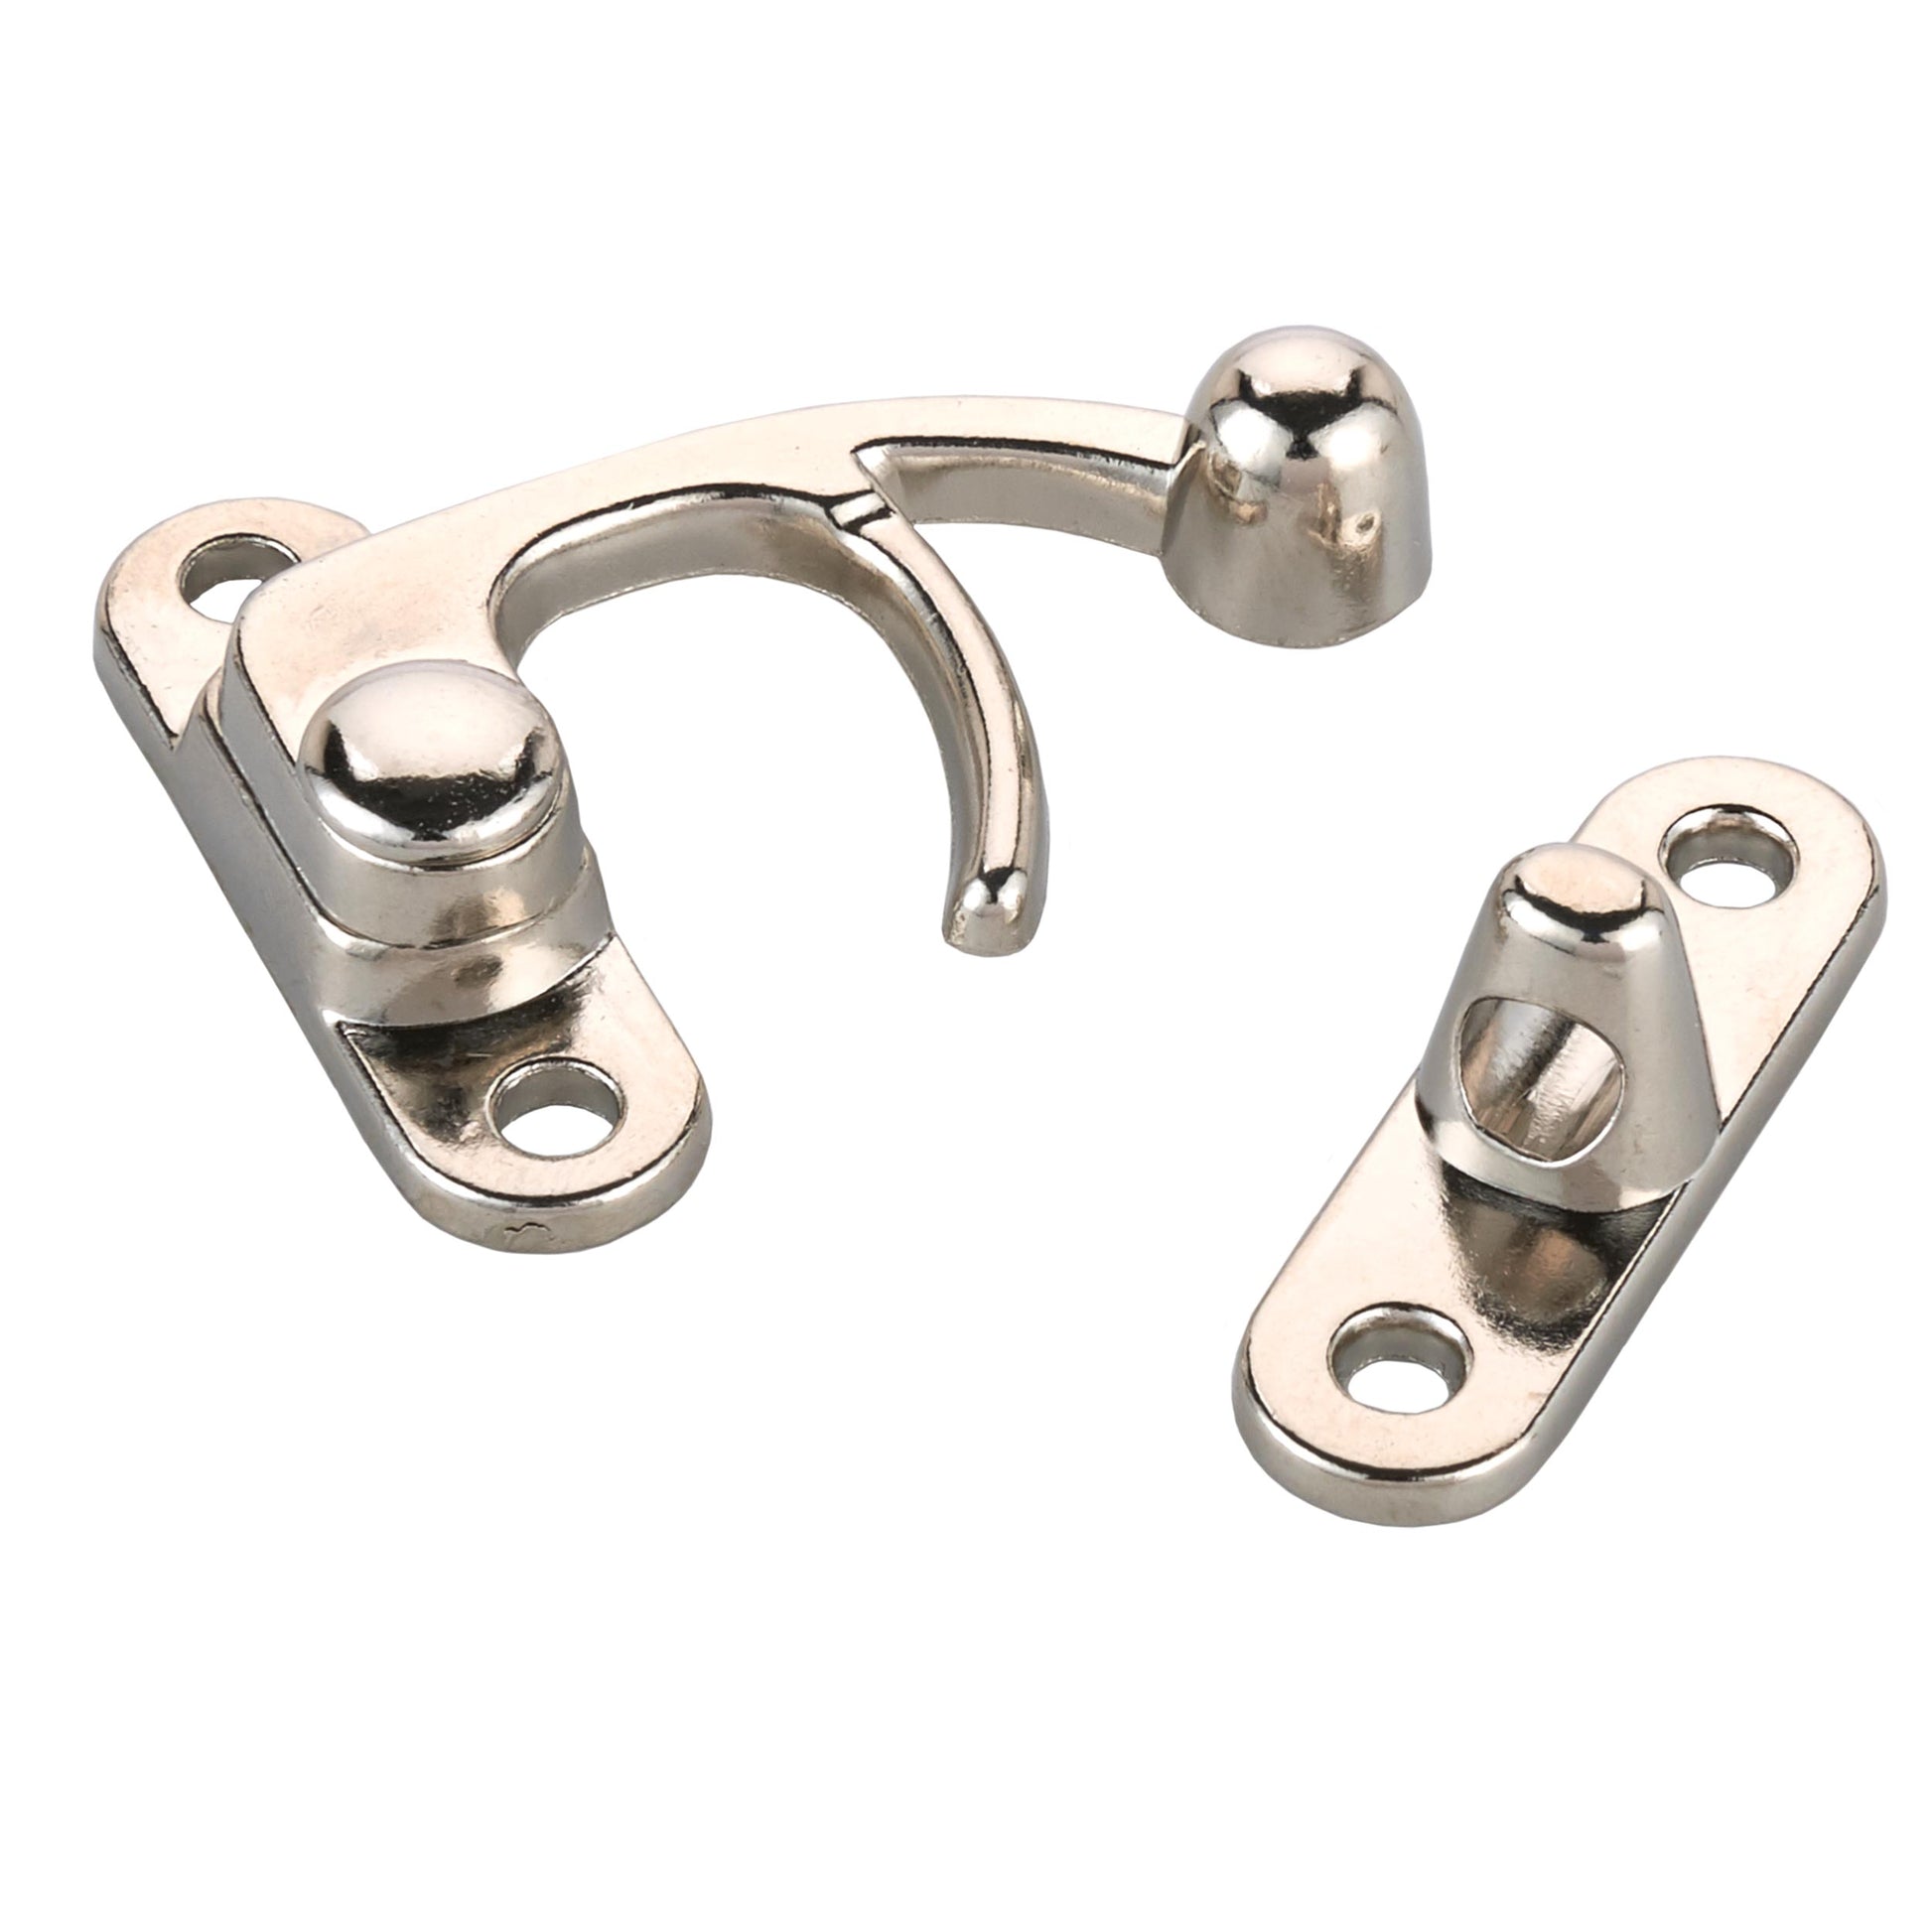 Highpoint Hook Latch Large Nickel Finish 1-Piece with Screws